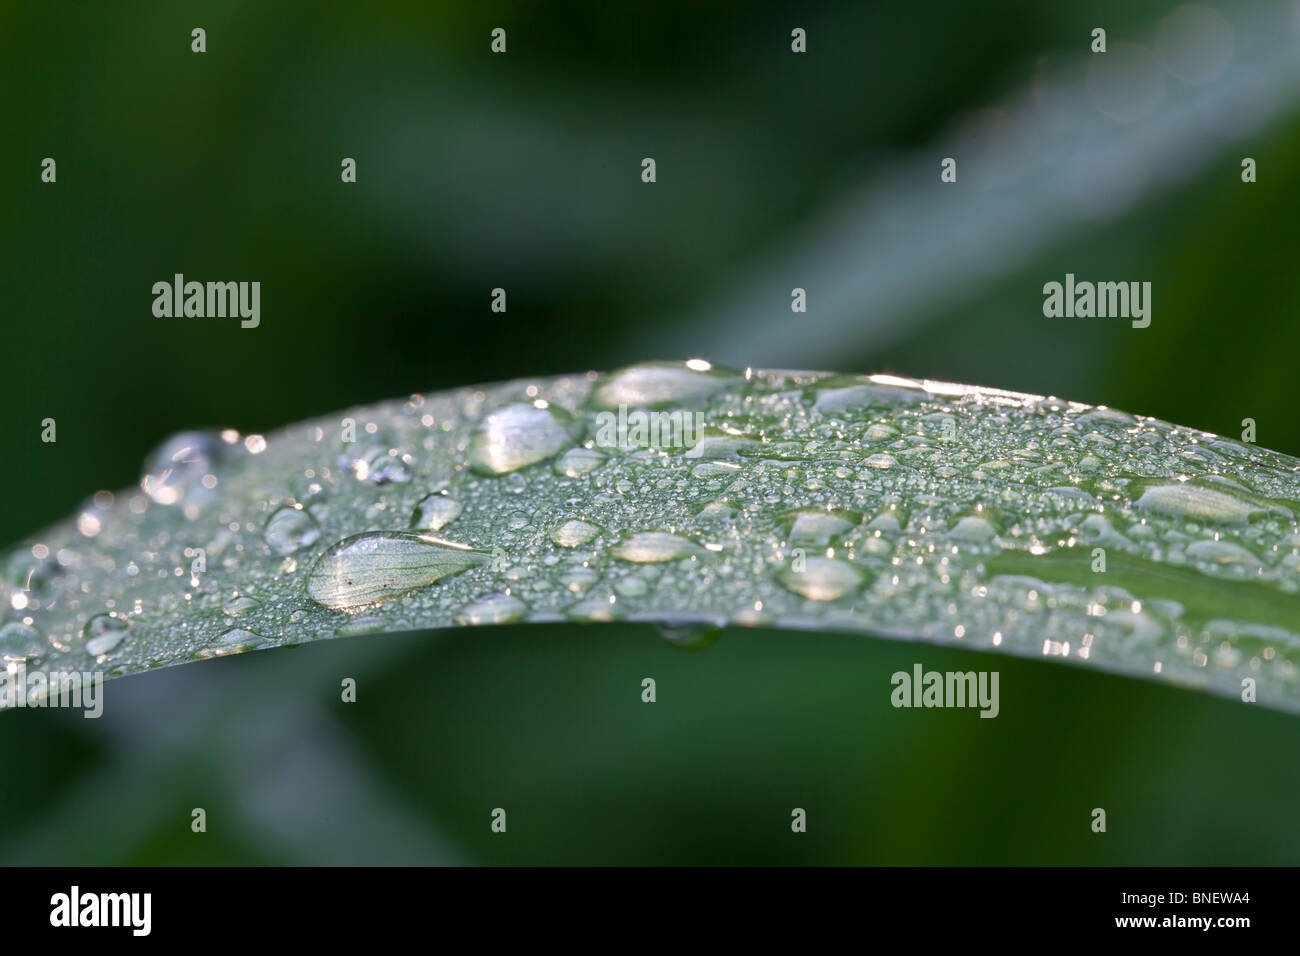 Beads of water on plant leaves in Shakespeare's garden in Central Park, New York City Stock Photo